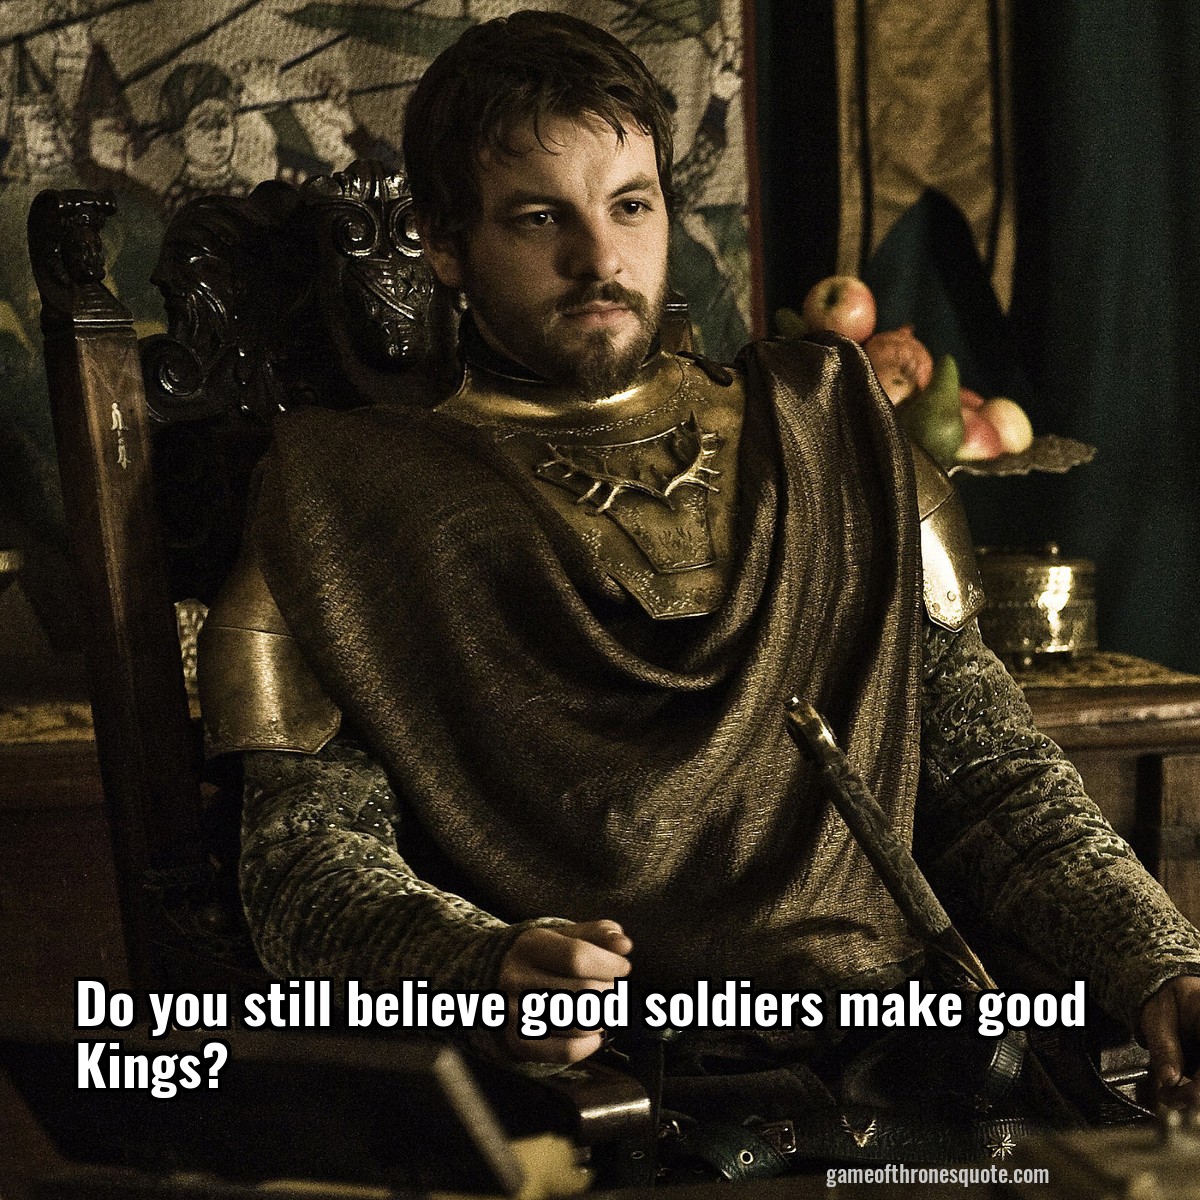 Do you still believe good soldiers make good Kings?